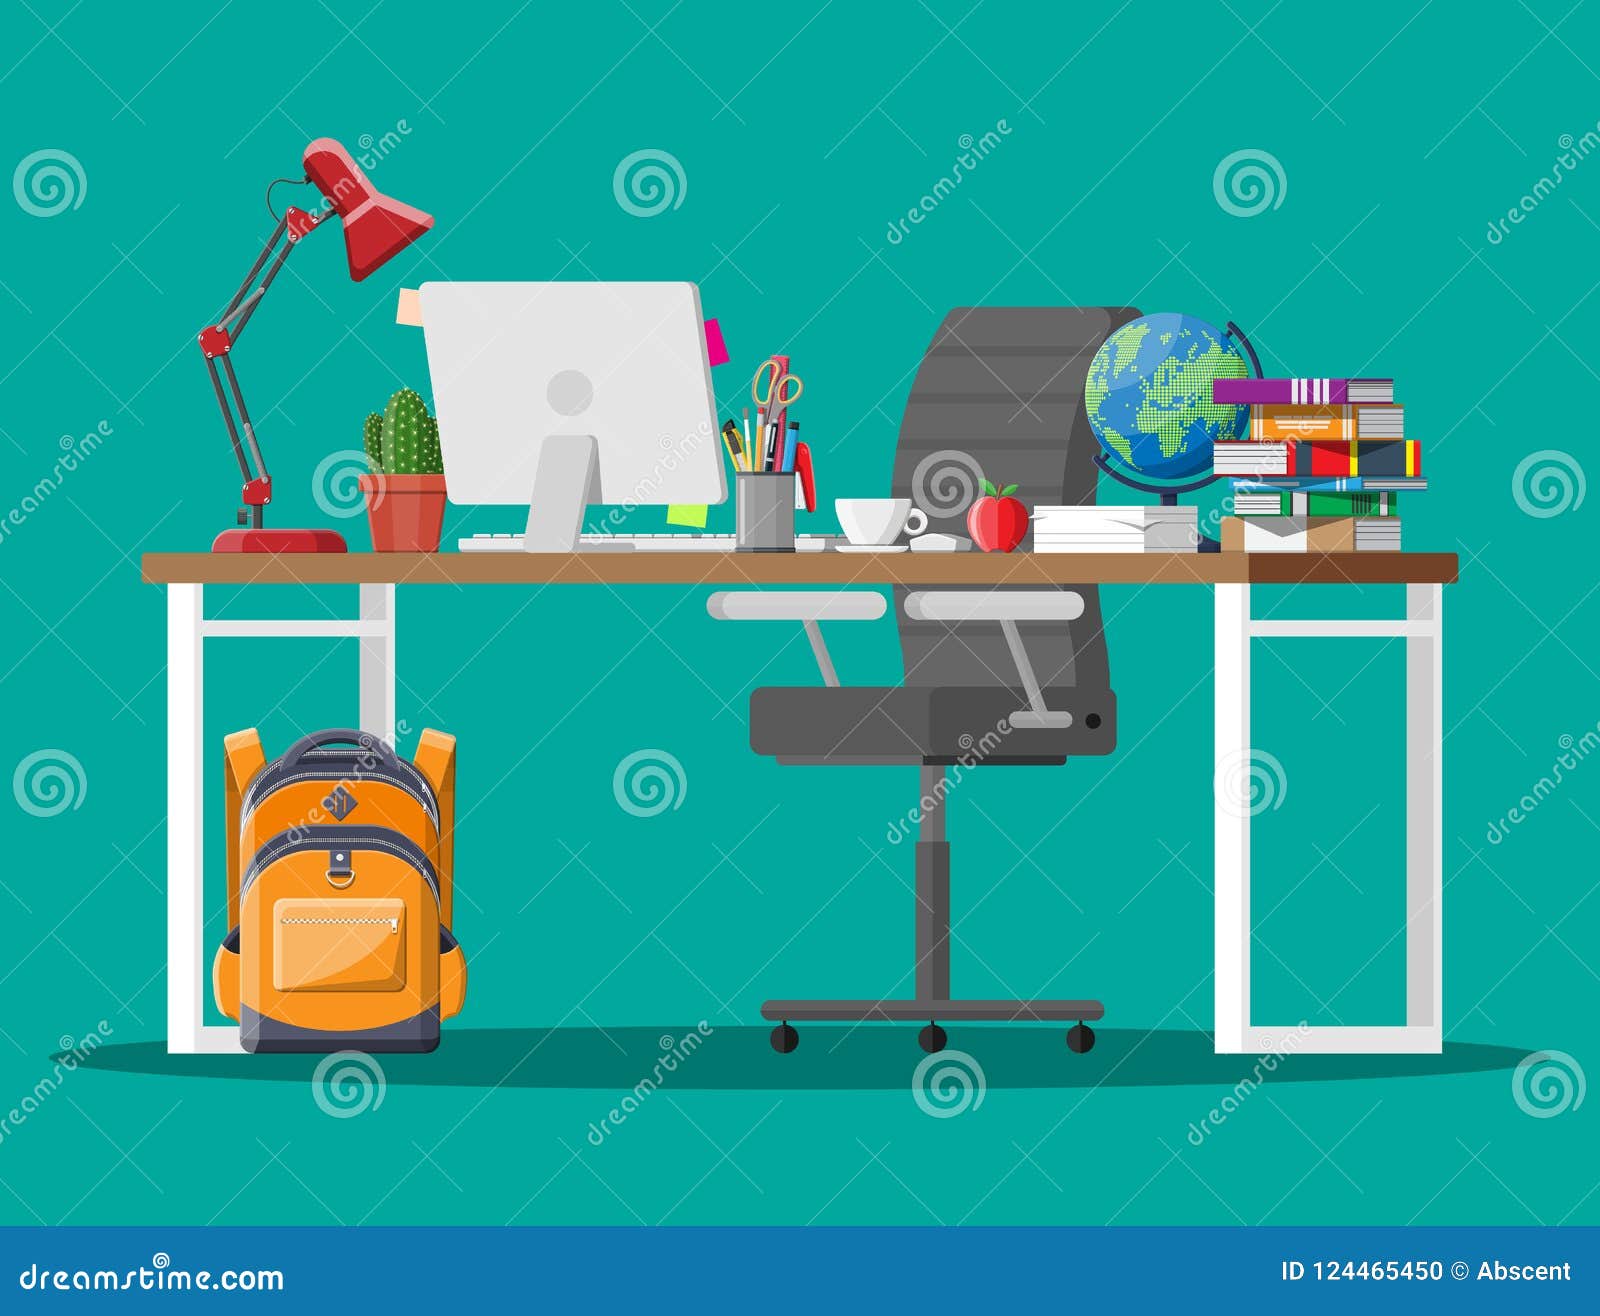 Home Kids Table Kid For Learning And Study Stock Vector